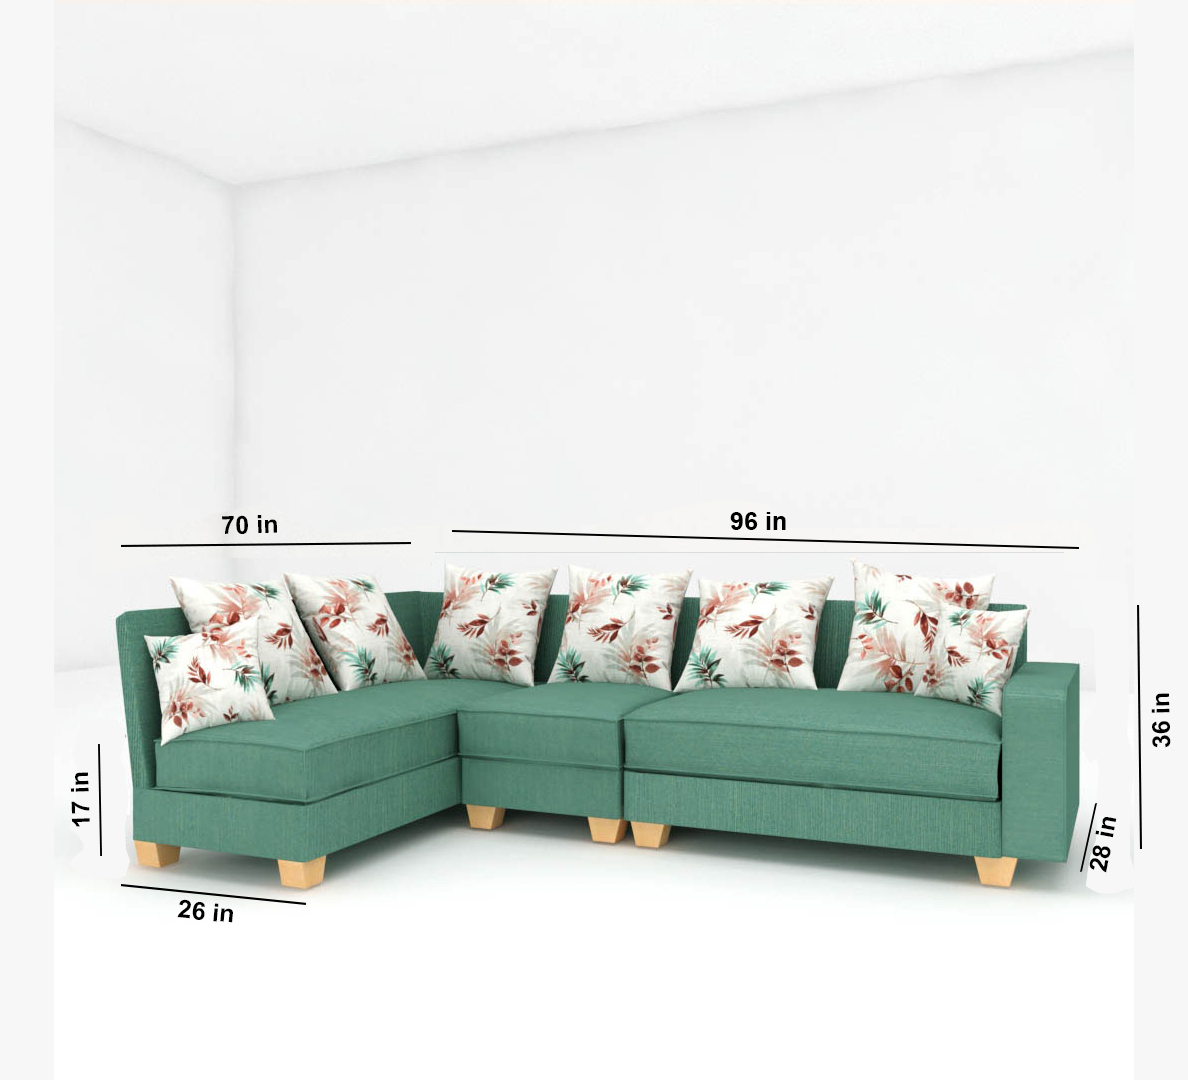  6 Seater RHS Sectional  Conner Sofa